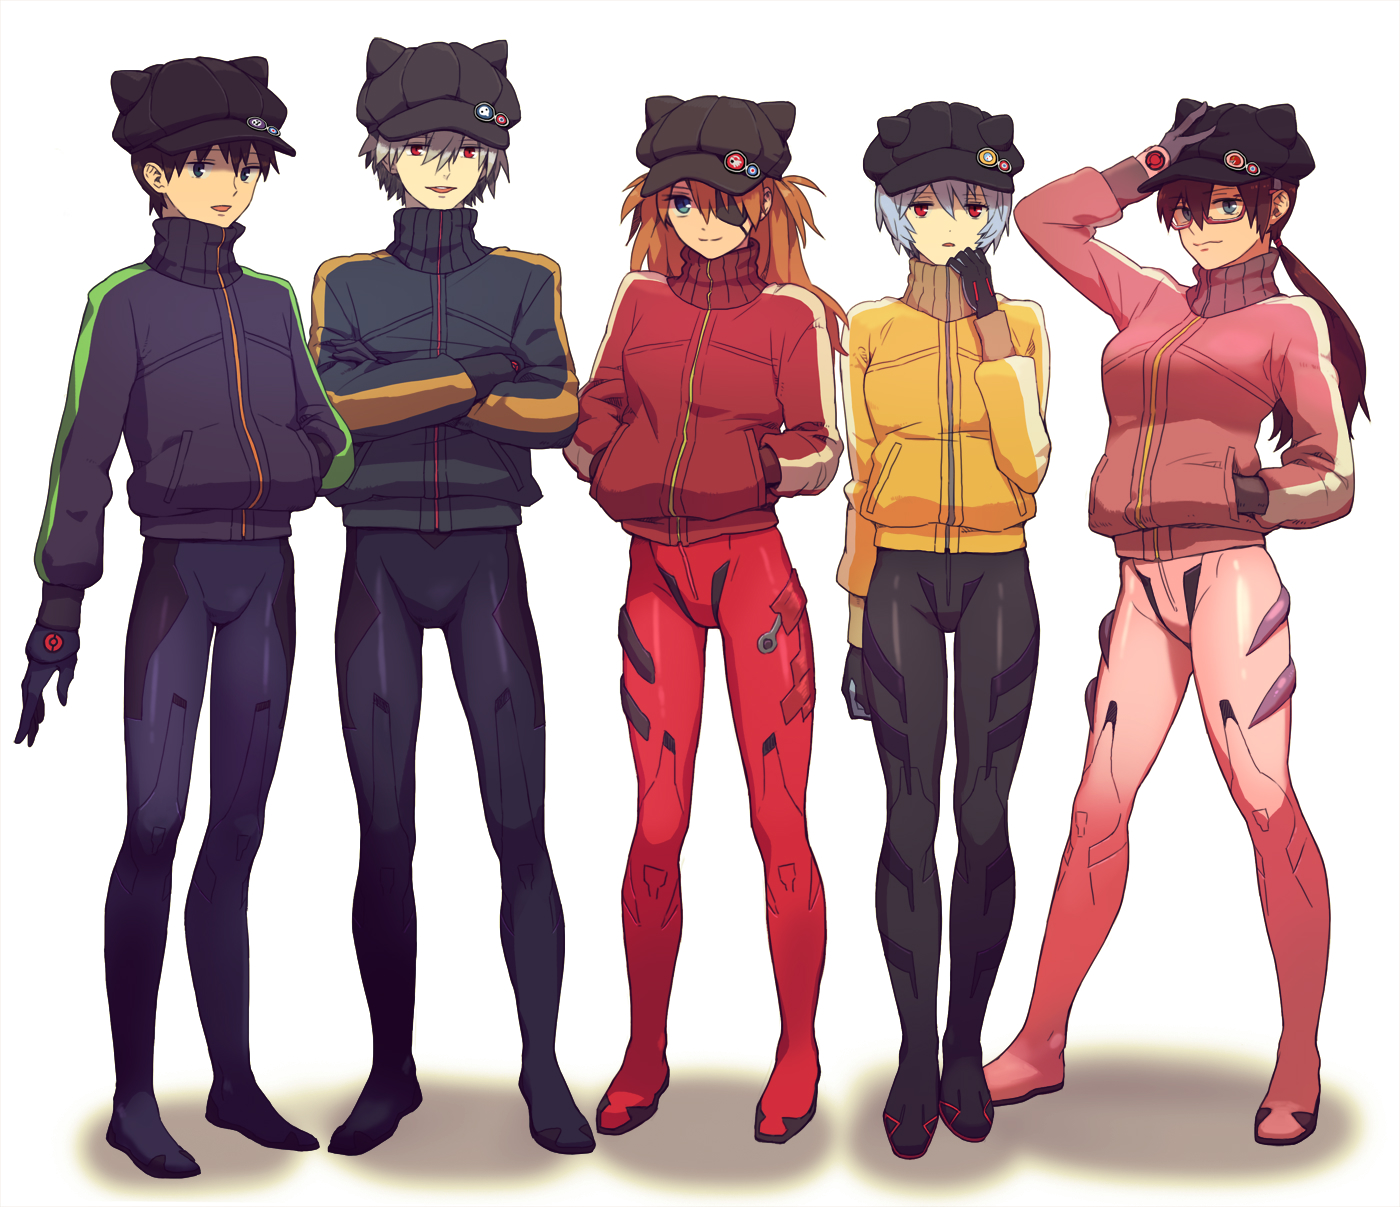 Anime Evangelion: 3.0 You Can (Not) Redo Art